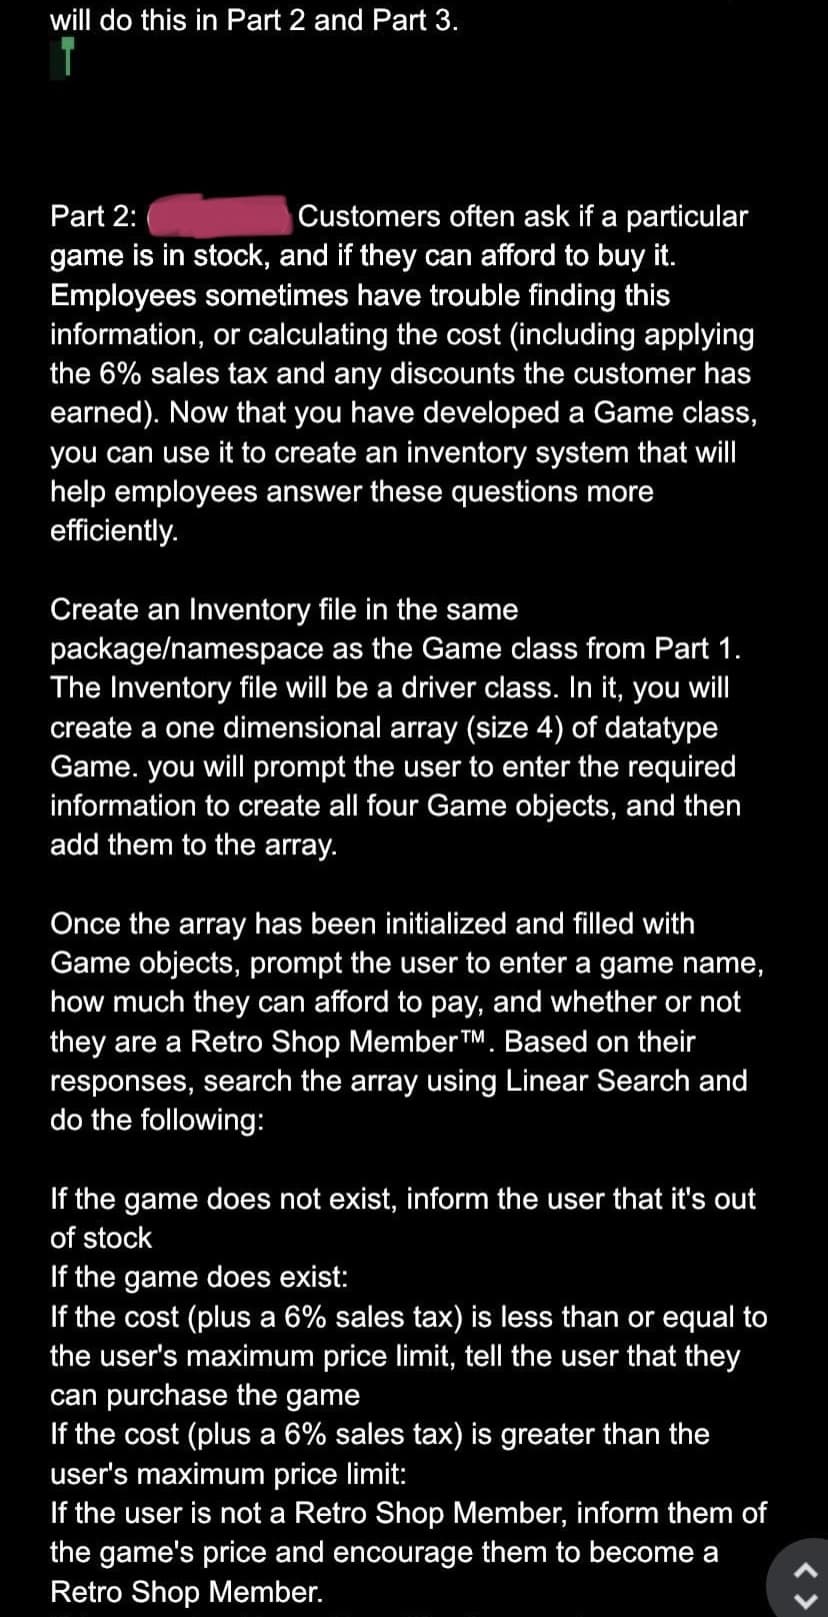 will do this in Part 2 and Part 3.
Part 2:
Customers often ask if a particular
game is in stock, and if they can afford to buy it.
Employees sometimes have trouble finding this
information, or calculating the cost (including applying
the 6% sales tax and any discounts the customer has
earned). Now that you have developed a Game class,
you can use it to create an inventory system that will
help employees answer these questions more
efficiently.
Create an Inventory file in the same
package/namespace as the Game class from Part 1.
The Inventory file will be a driver class. In it, you will
create a one dimensional array (size 4) of datatype
Game. you will prompt the user to enter the required
information to create all four Game objects, and then
add them to the array.
Once the array has been initialized and filled with
Game objects, prompt the user to enter a game name,
how much they can afford to pay, and whether or not
they are a Retro Shop Member TM. Based on their
responses, search the array using Linear Search and
do the following:
If the game does not exist, inform the user that it's out
of stock
If the game does exist:
If the cost (plus a 6% sales tax) is less than or equal to
the user's maximum price limit, tell the user that they
can purchase the game
If the cost (plus a 6% sales tax) is greater than the
user's maximum price limit:
If the user is not a Retro Shop Member, inform them of
the game's price and encourage them to become a
Retro Shop Member.
